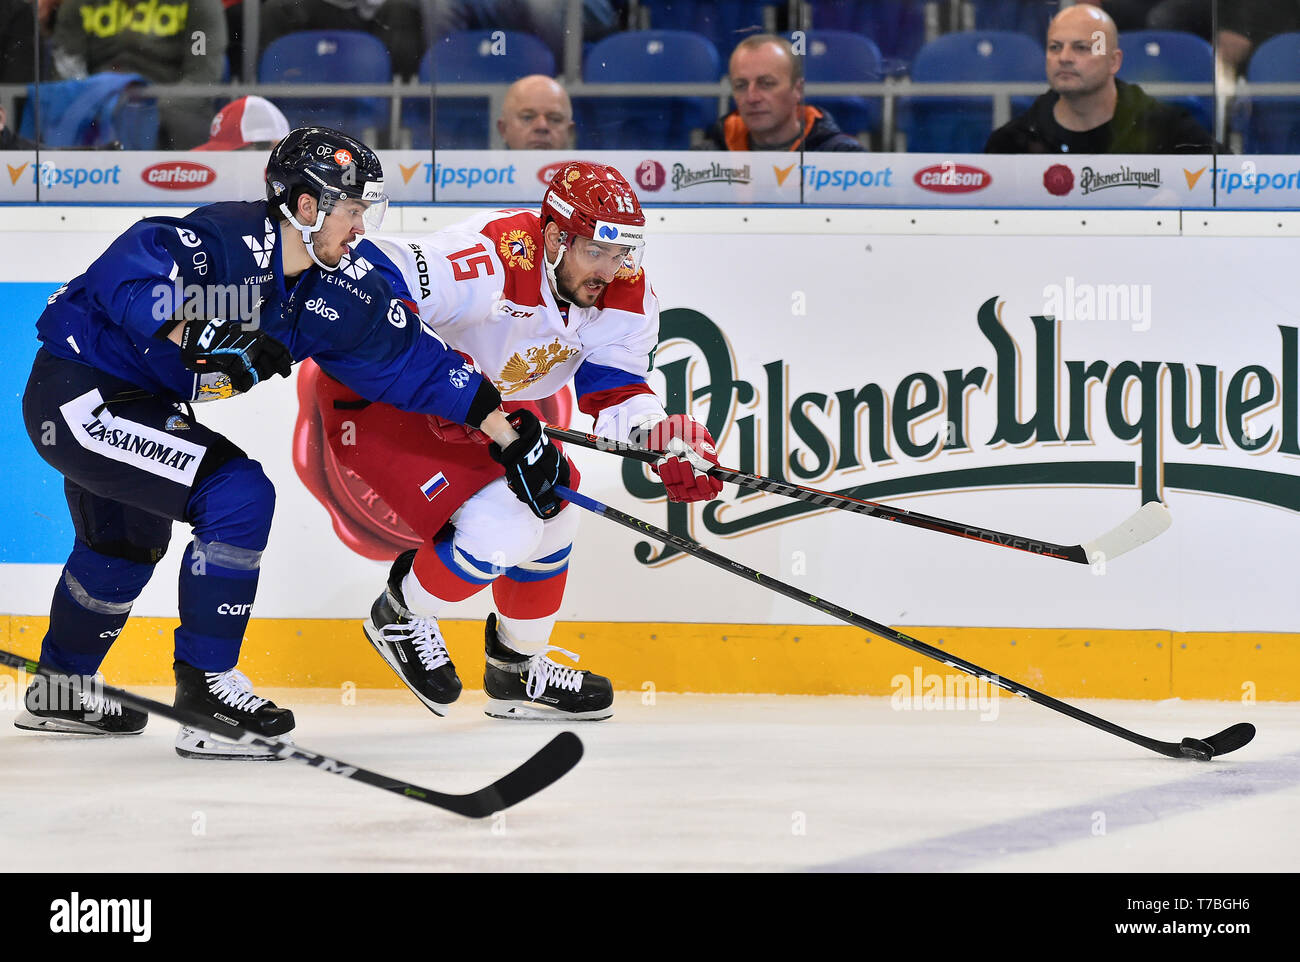 Brno, Czech Republic. 04th May, 2019. L-R Oliwer Kaski (FIN) and Artyom Anisimov (RUS) in action during the Russia vs Finland match within Carlson Hockey Games tournament, part of Euro Hockey Tour in Brno, Czech Republic, May 5, 2019. Credit: Lubos Pavlicek/CTK Photo/Alamy Live News Stock Photo